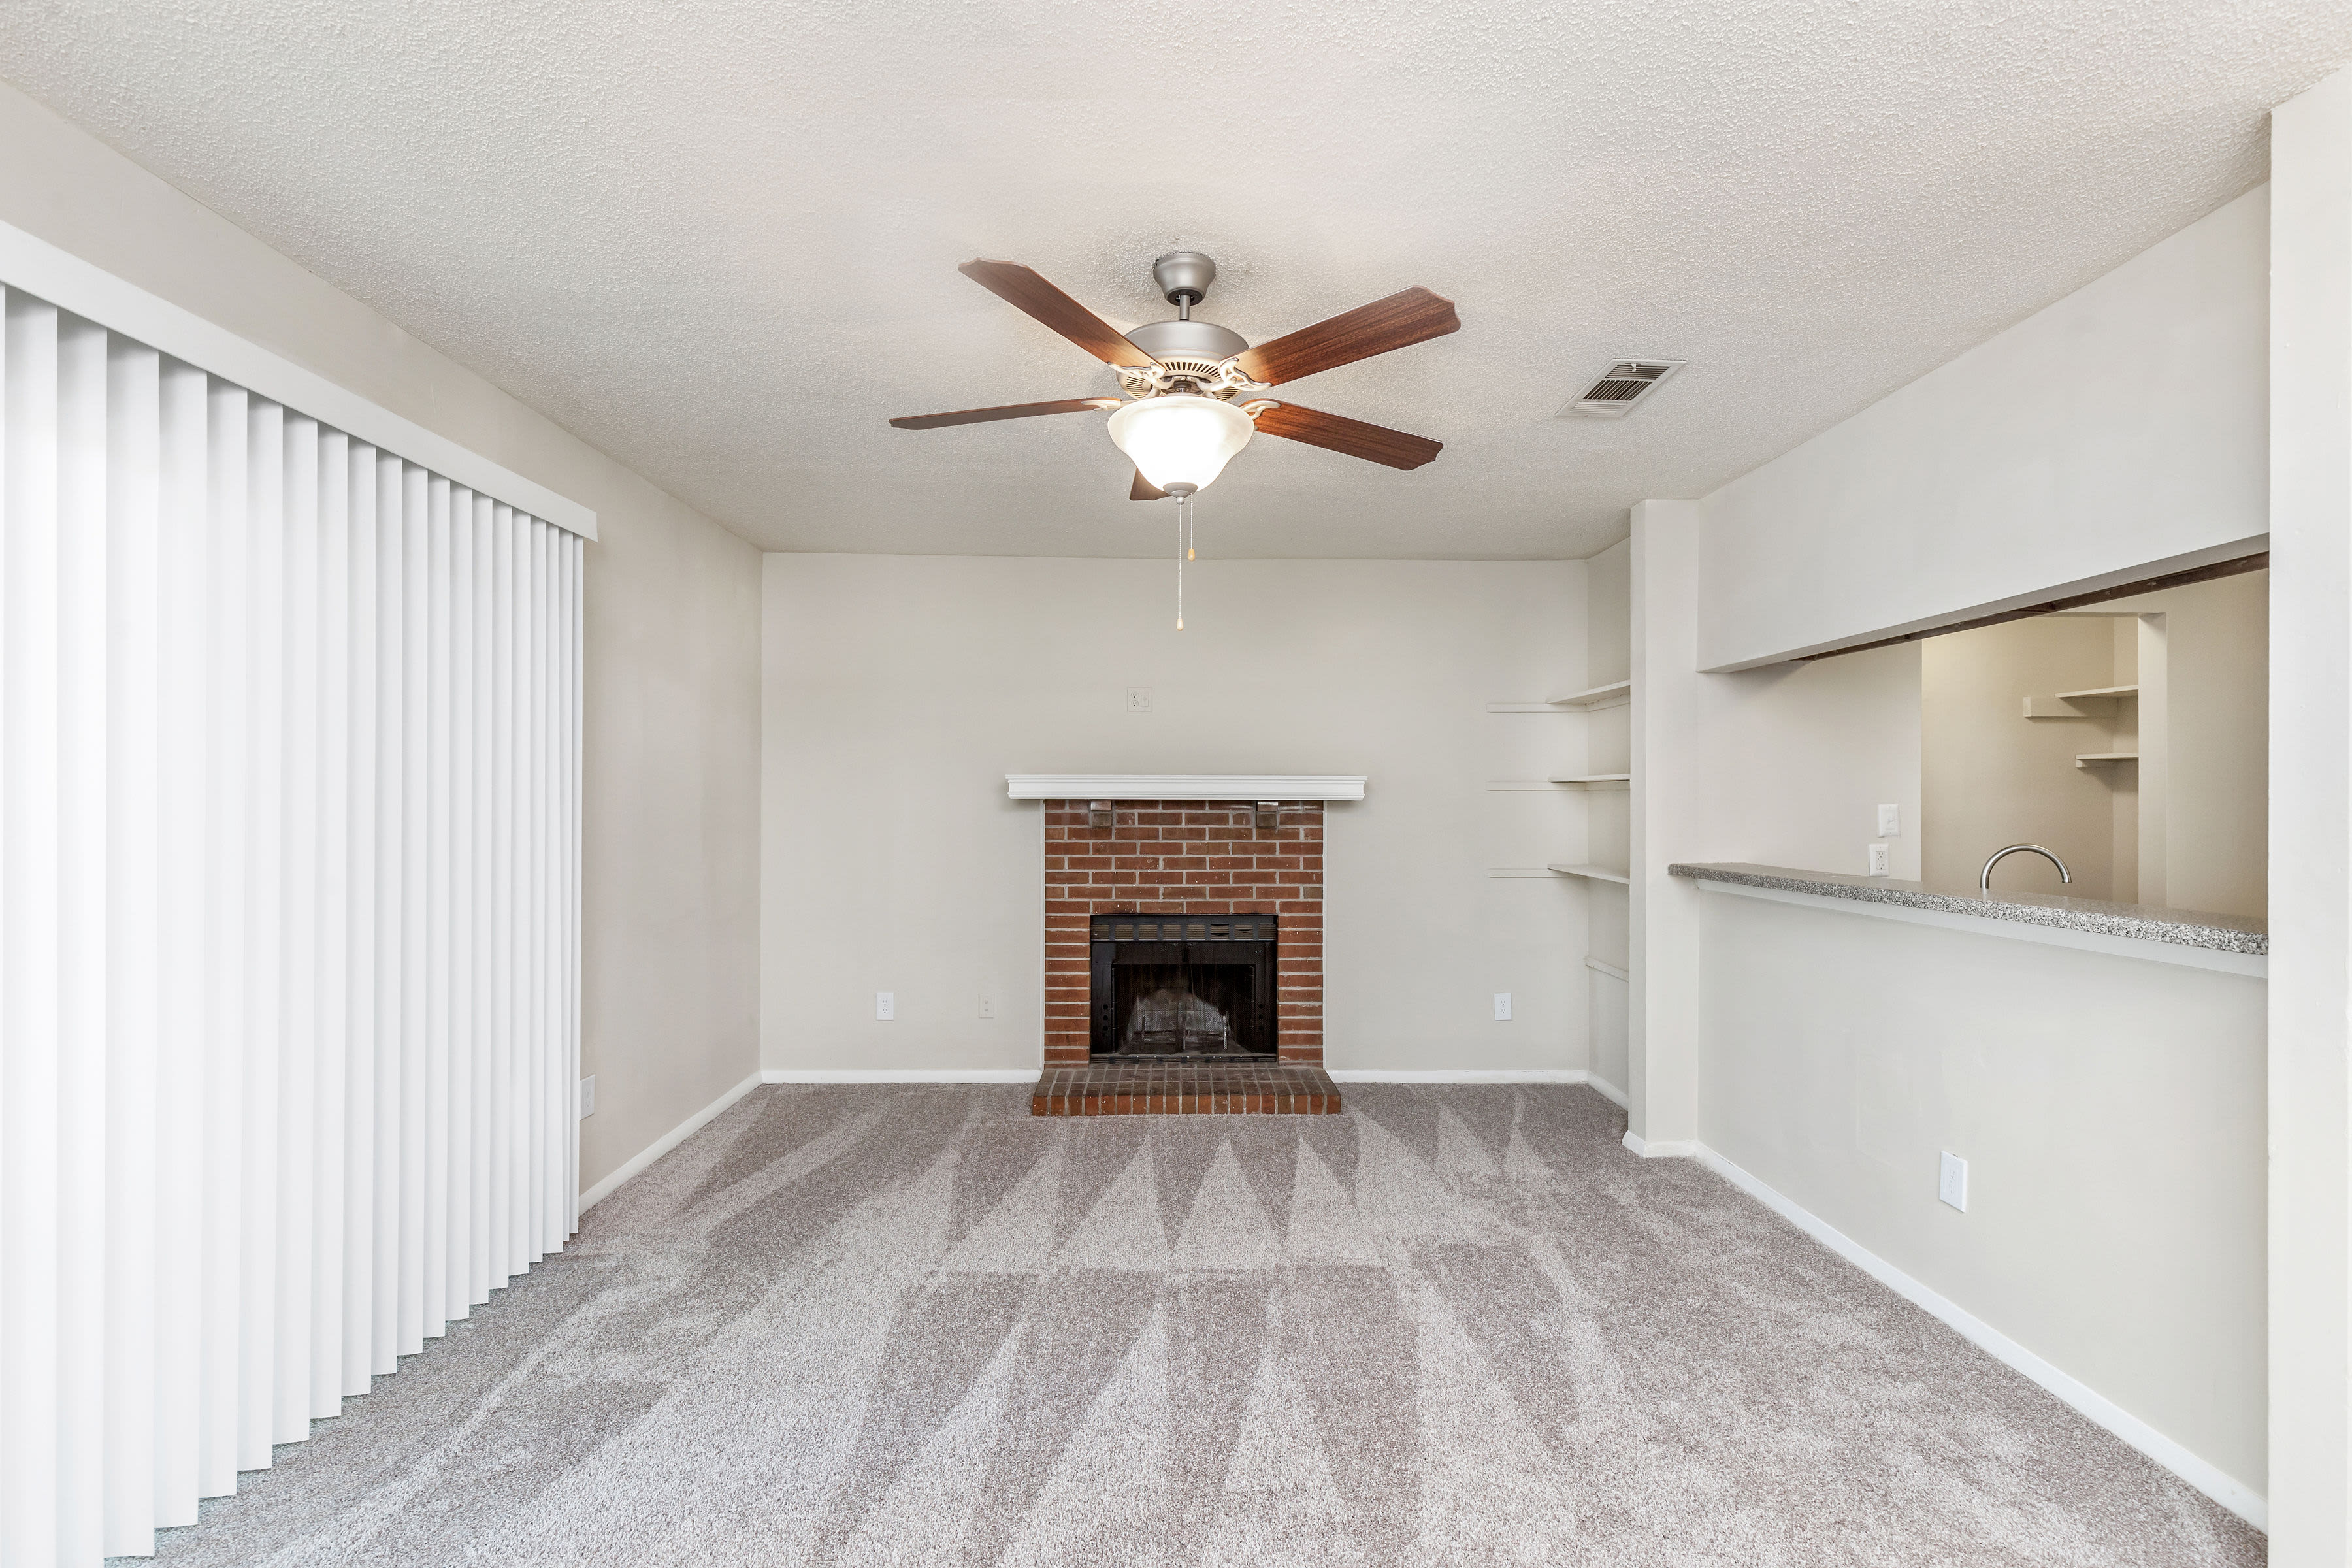 Living room with carpeting and ceiling fan at Gregory Lane Apartments in Acworth, Georgia